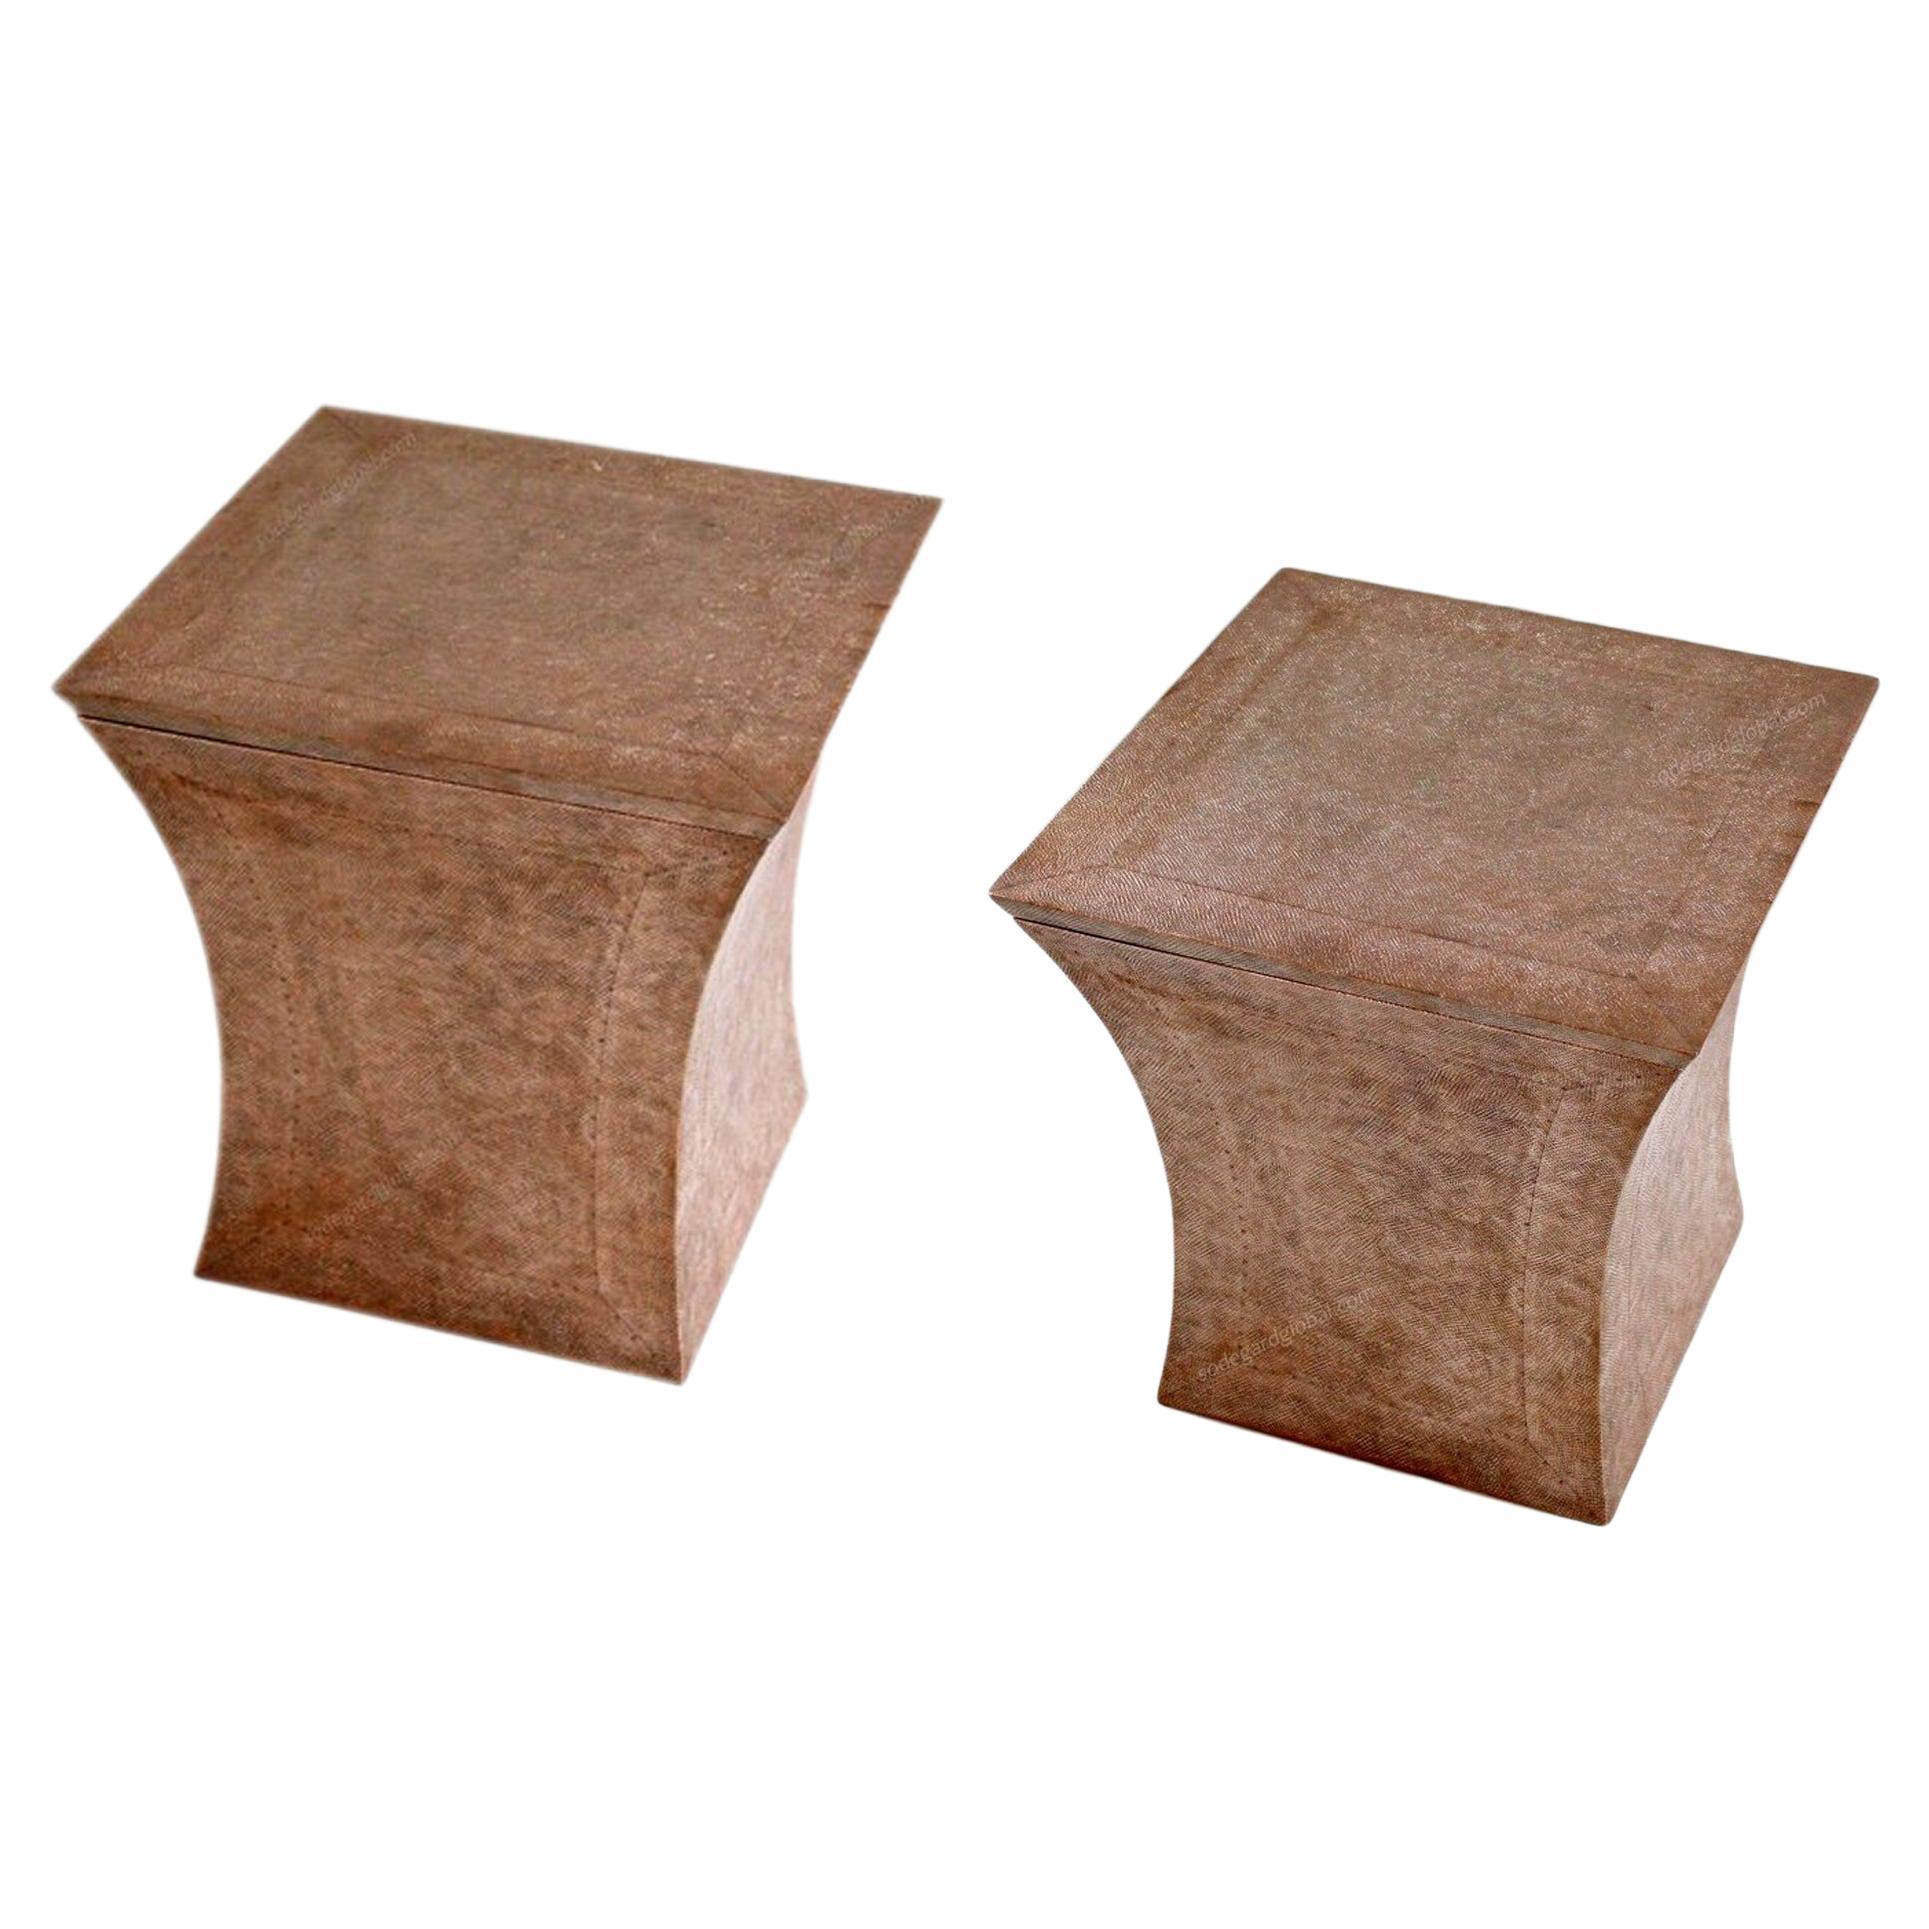 Set of Two Vaisseau Side Tables in Copper Clad Over Wood by Paul Mathieu